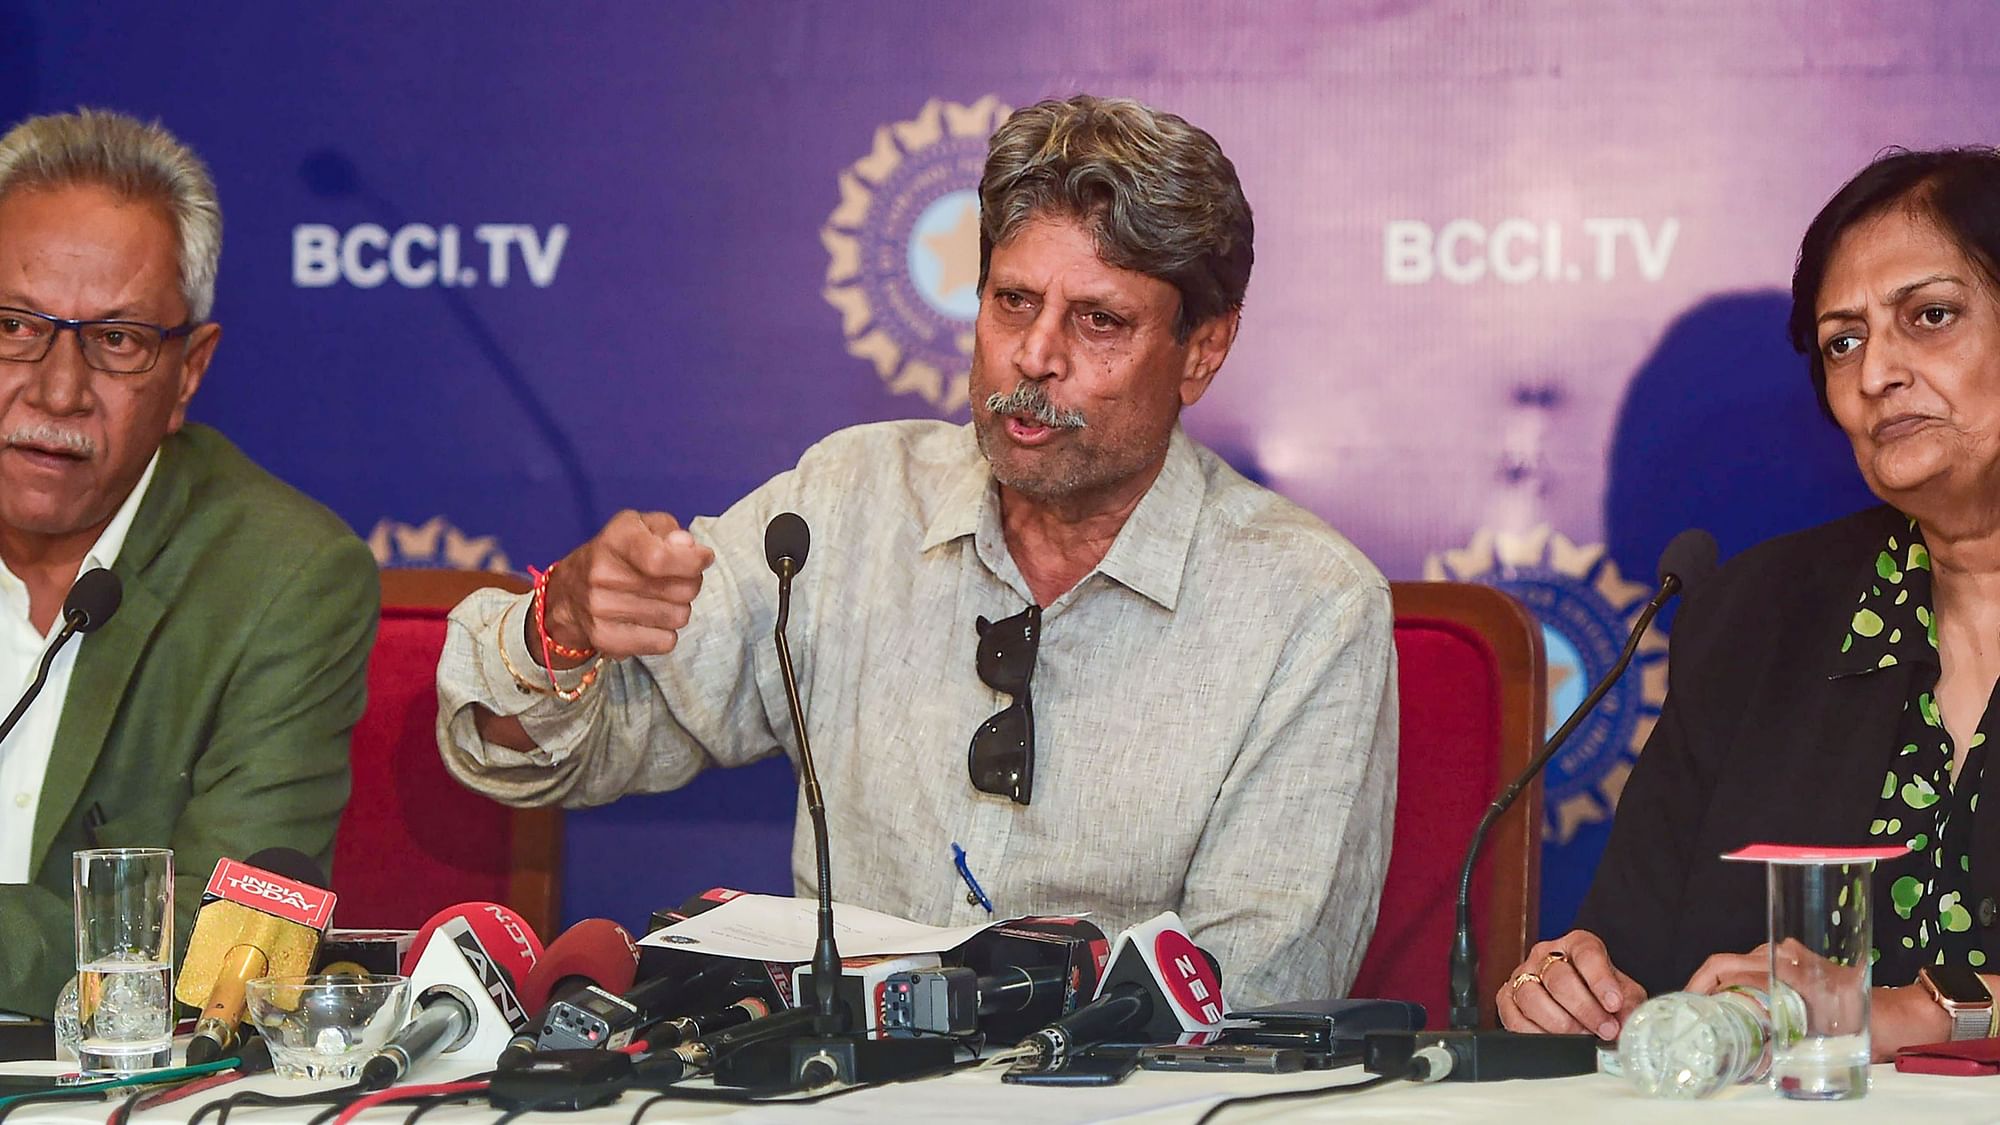 While Kapil Dev and Anshuman Gaekwad are aware of the meeting, third member Shantha Rangaswamy (Right) has revealed that she hasn’t been notified of any such meeting.